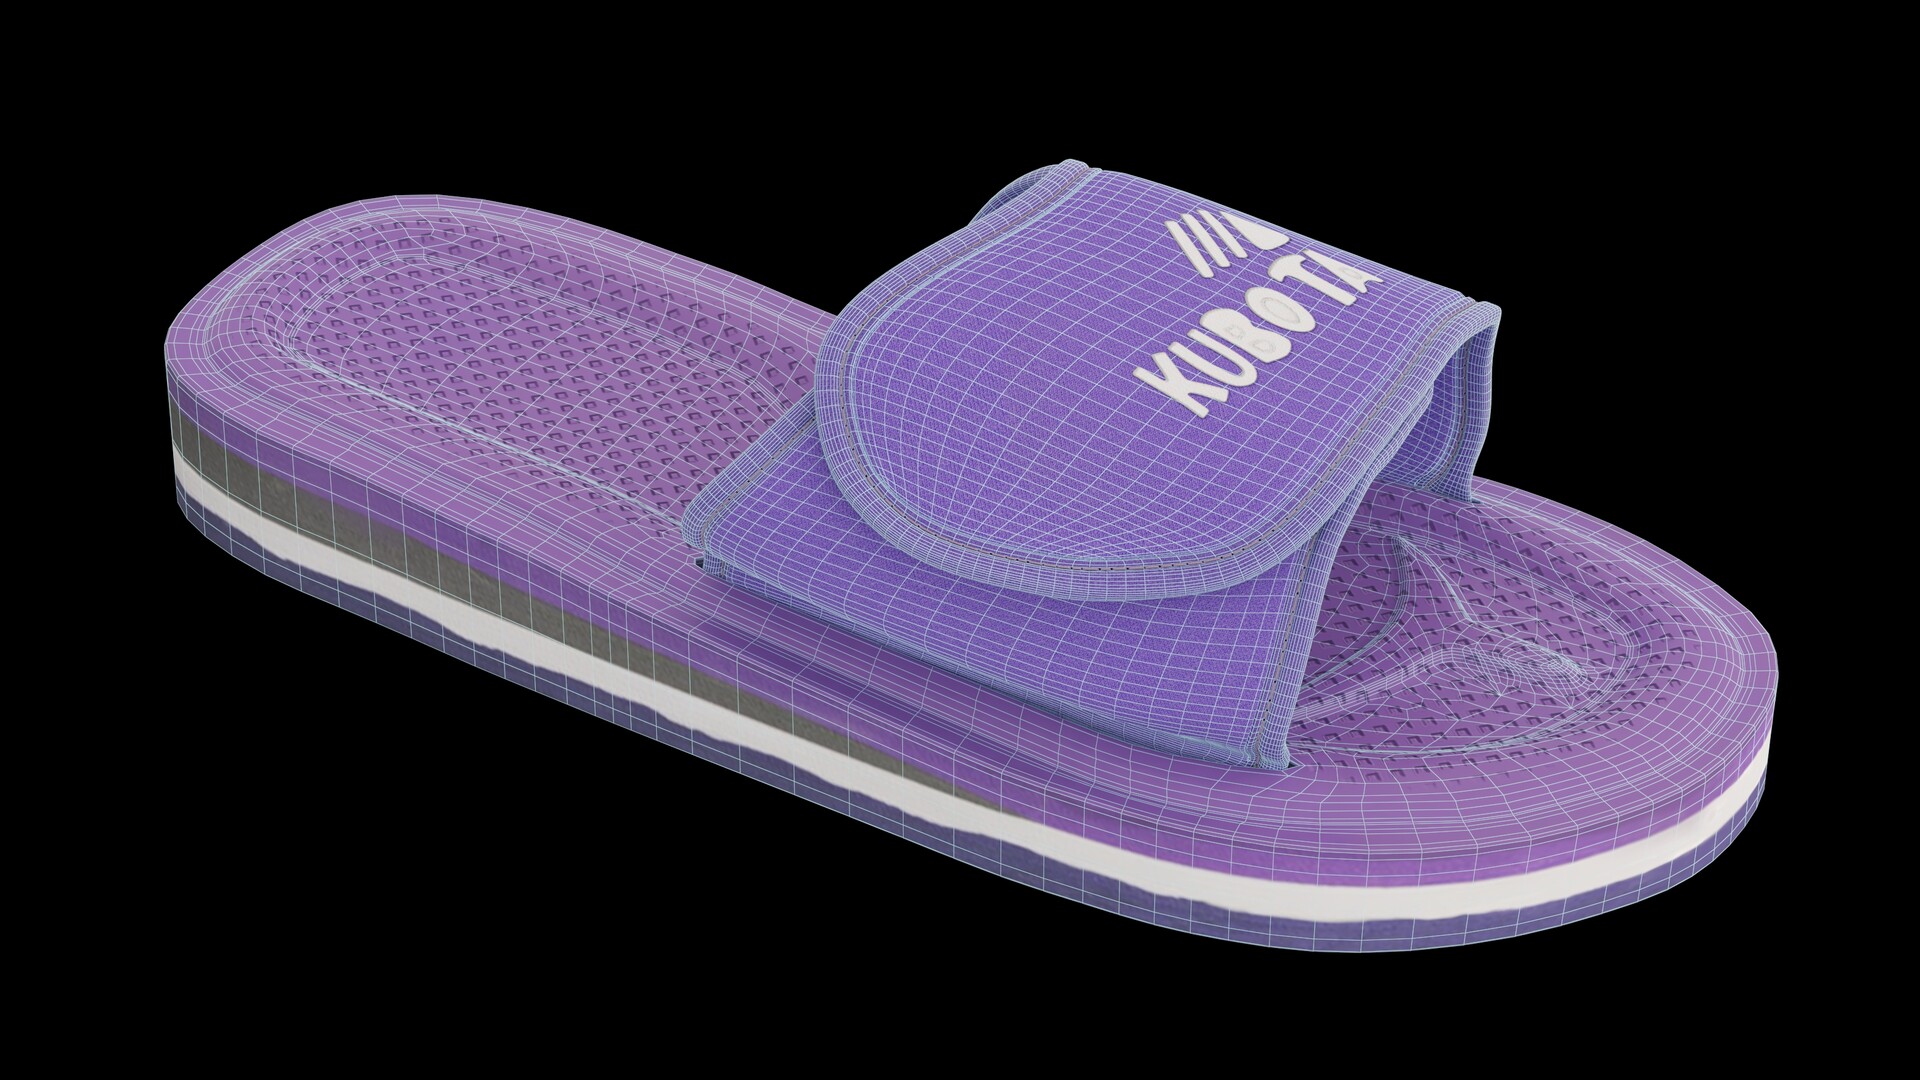 Slippers and Sandals 3d model. Free download. | Creazilla